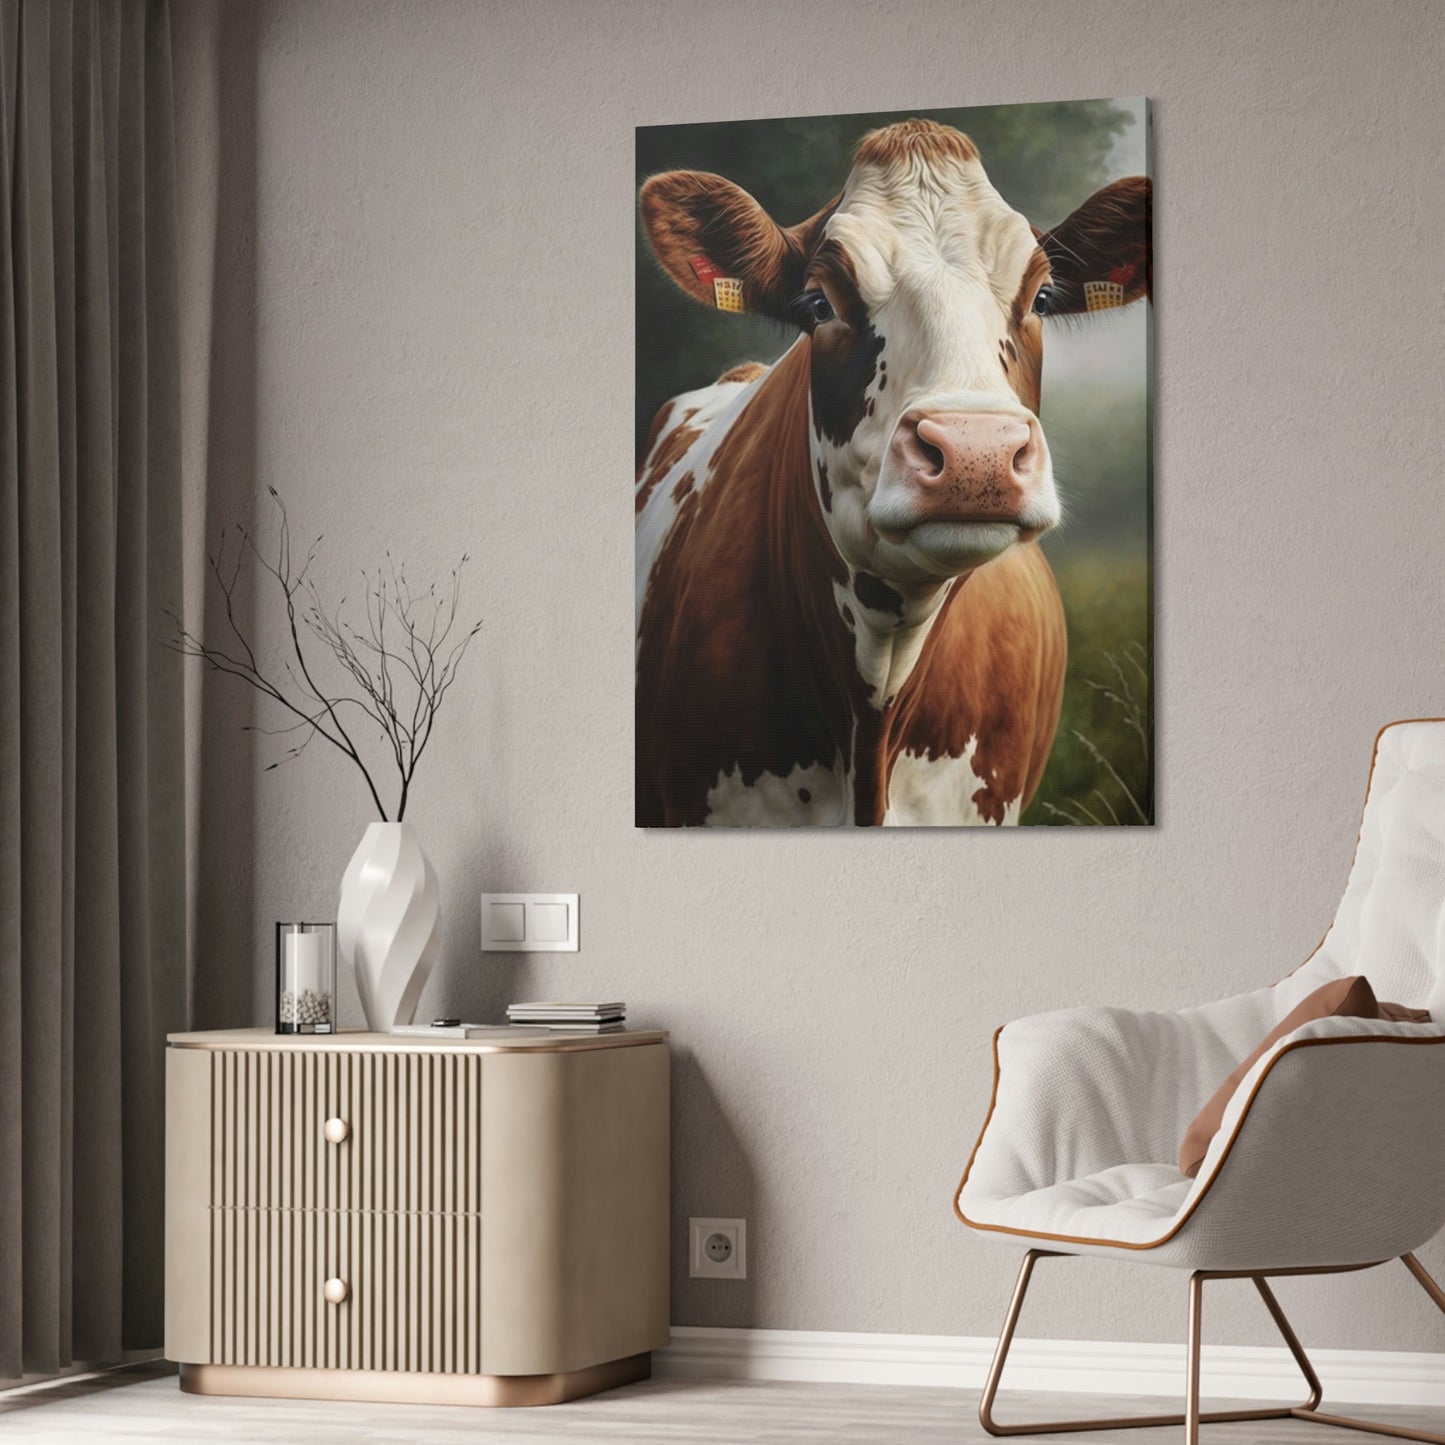 Bovine Beauty: A Painting of Cows in a Field